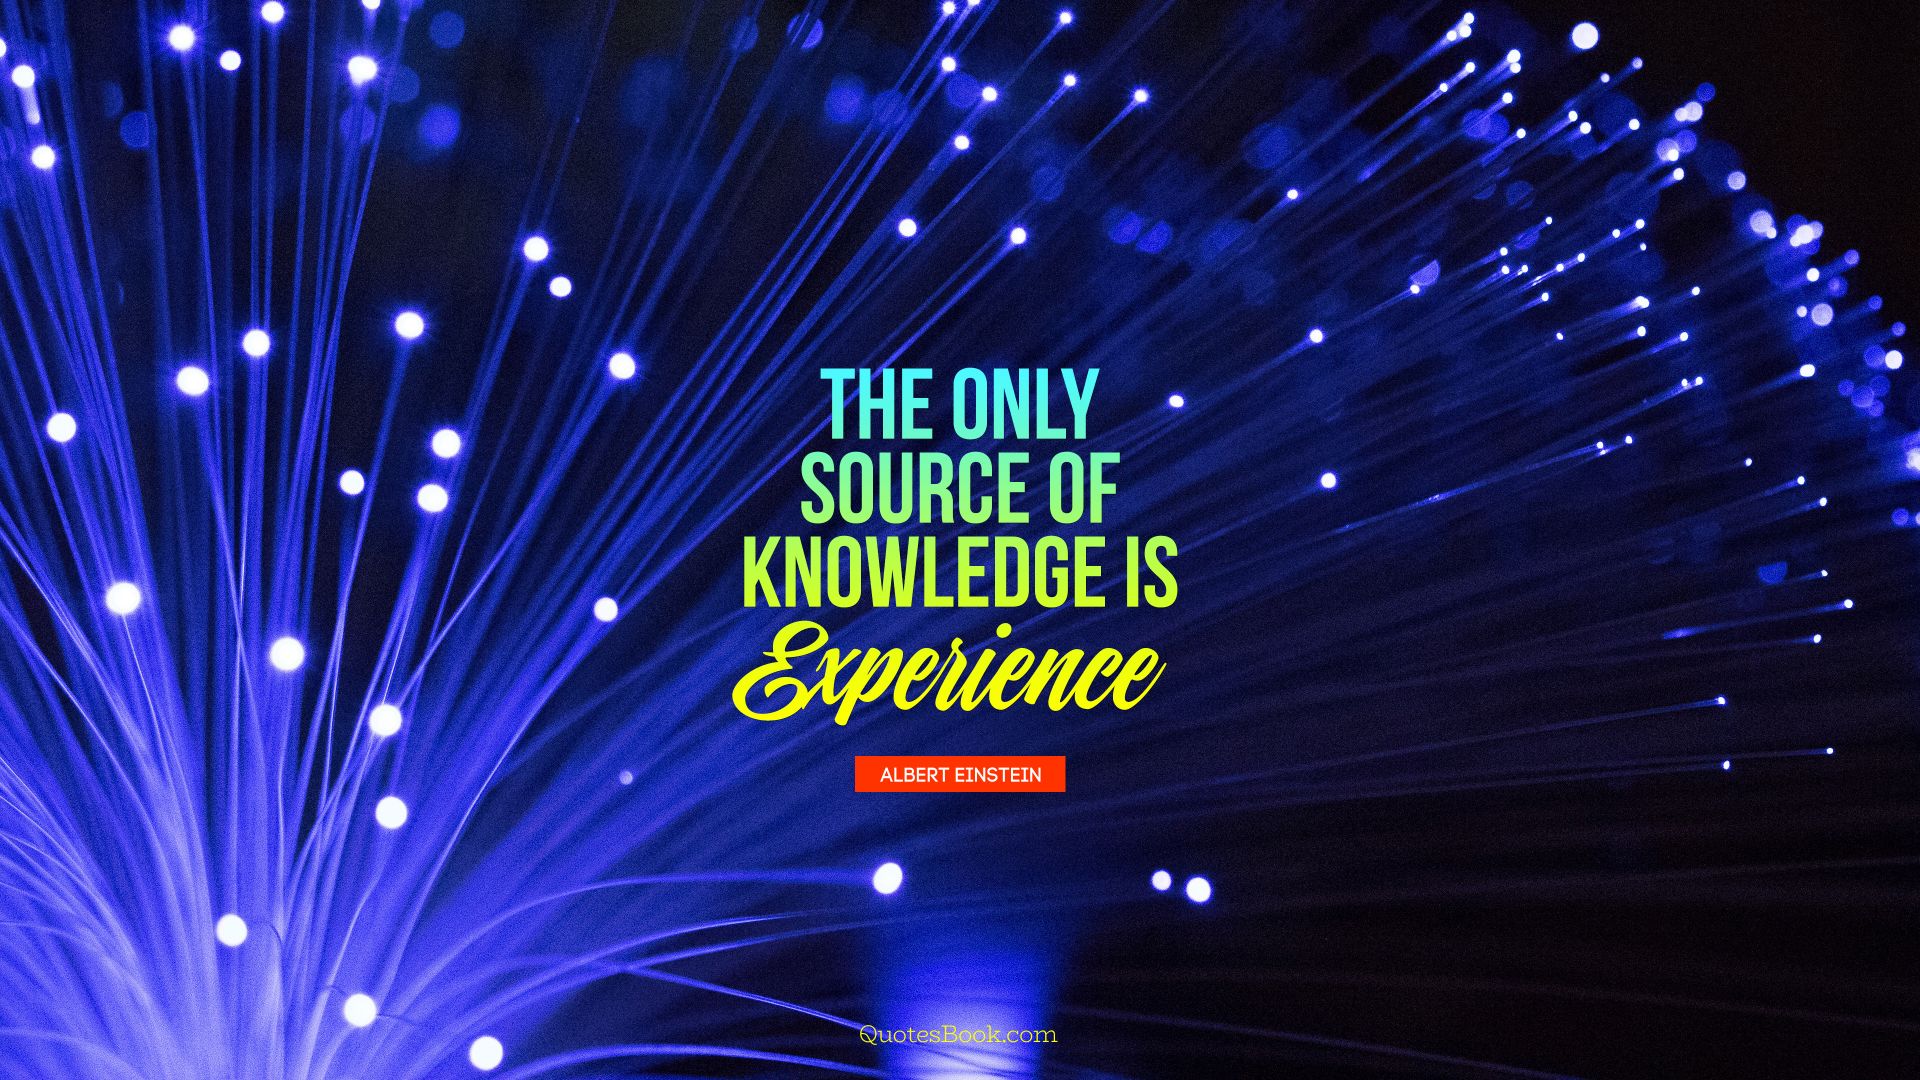 The only source of knowledge is experience. - Quote by Albert Einstein